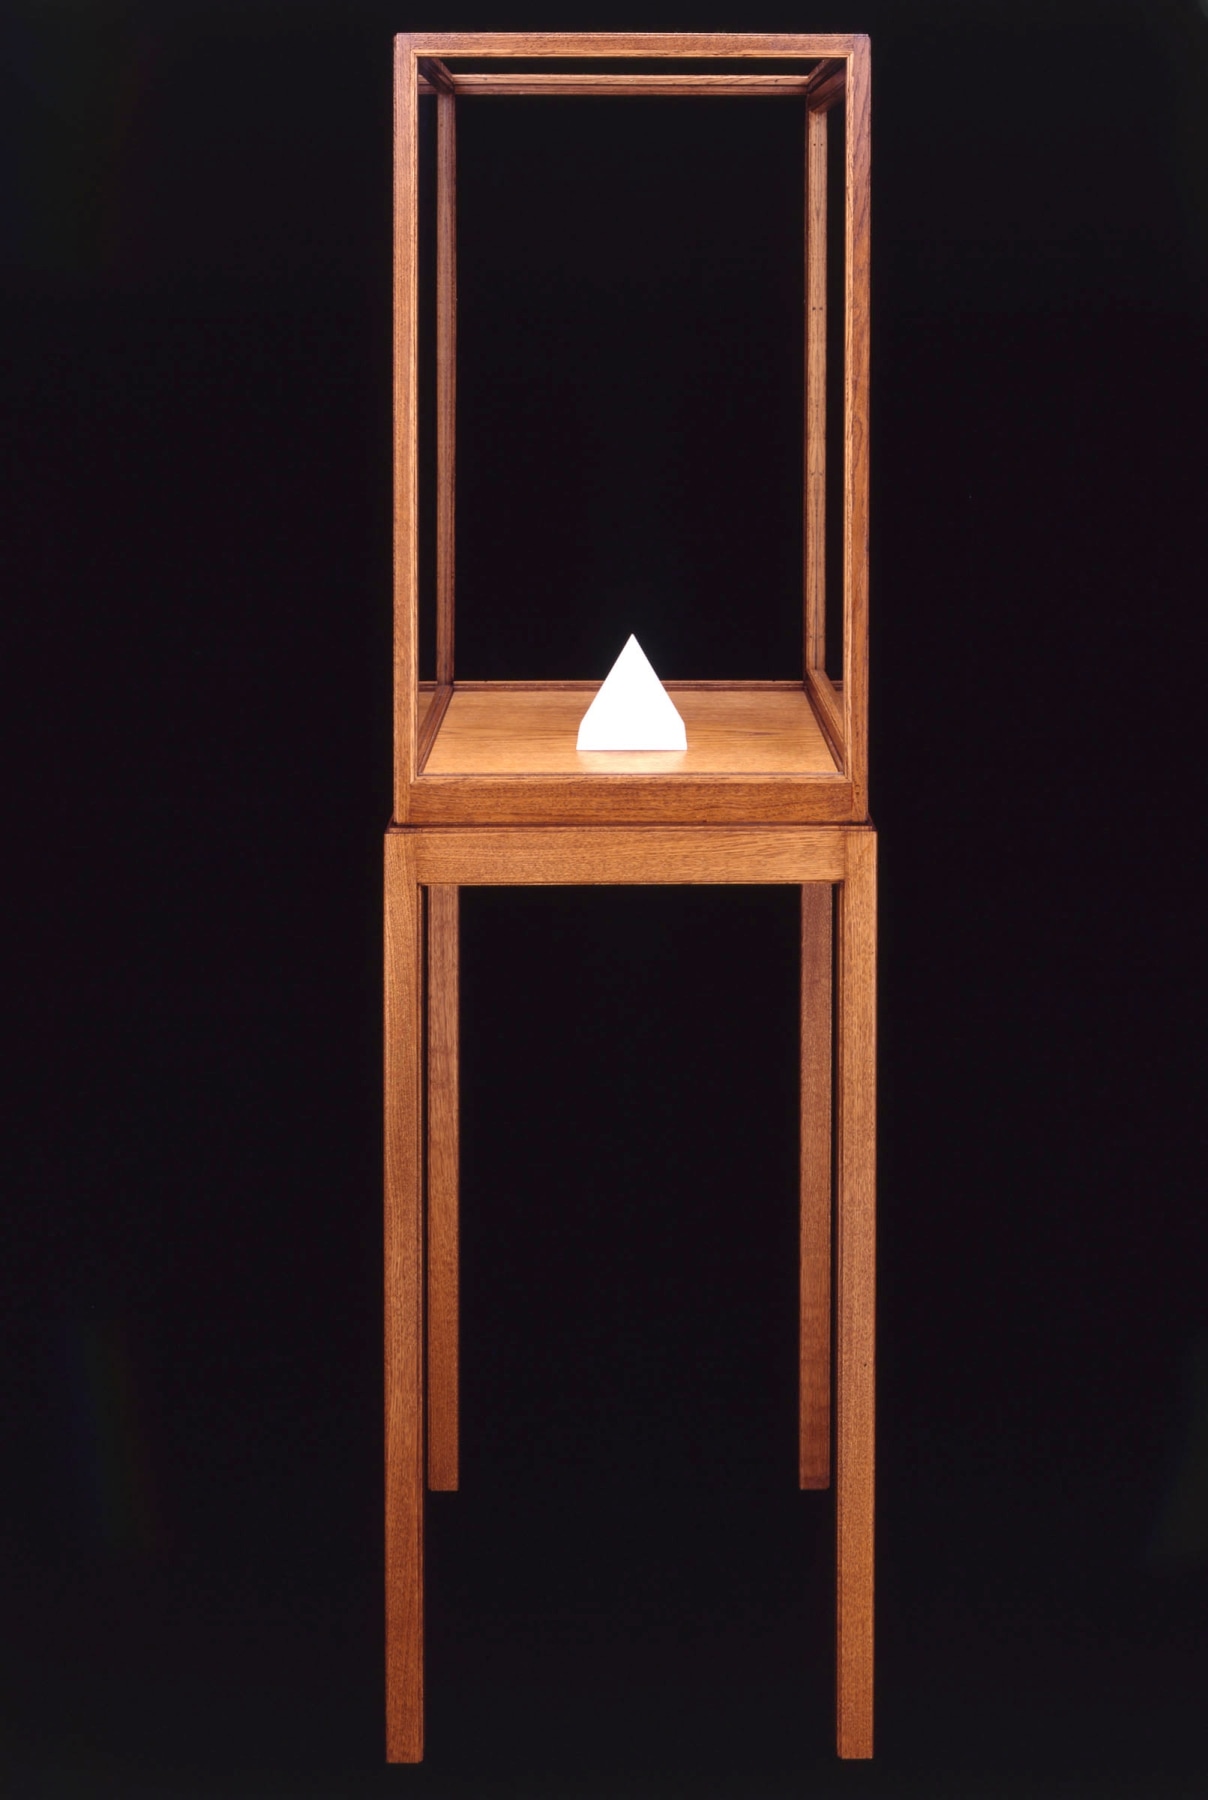 James Lee Byars

&amp;ldquo;The Triangle Book&amp;rdquo;, 1988

Marble

Two parts, overall:

4 3/4 x 4 3/4 x 4 3/4 inches

12 x 12 x 12 cm

JB 99/1

$150,000